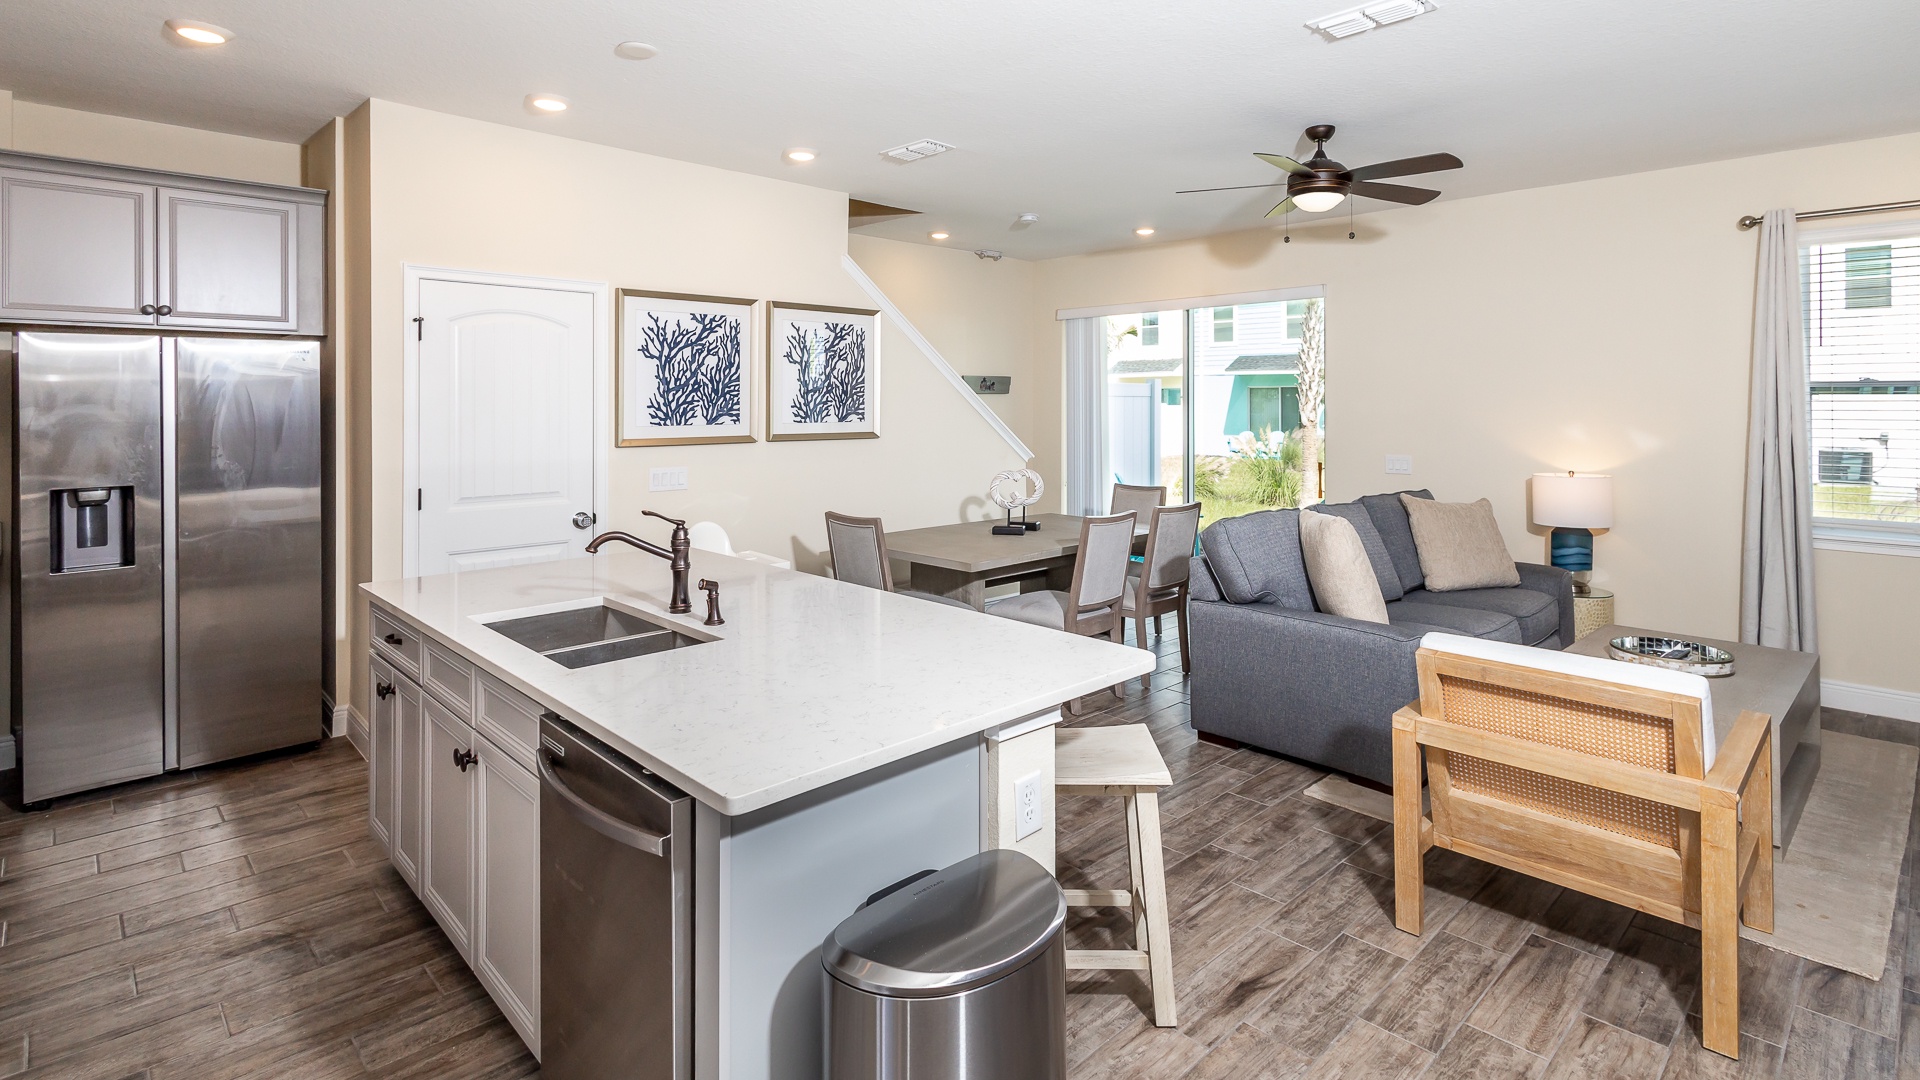 Enjoy the breezy, open layout of the living/dining/kitchen area